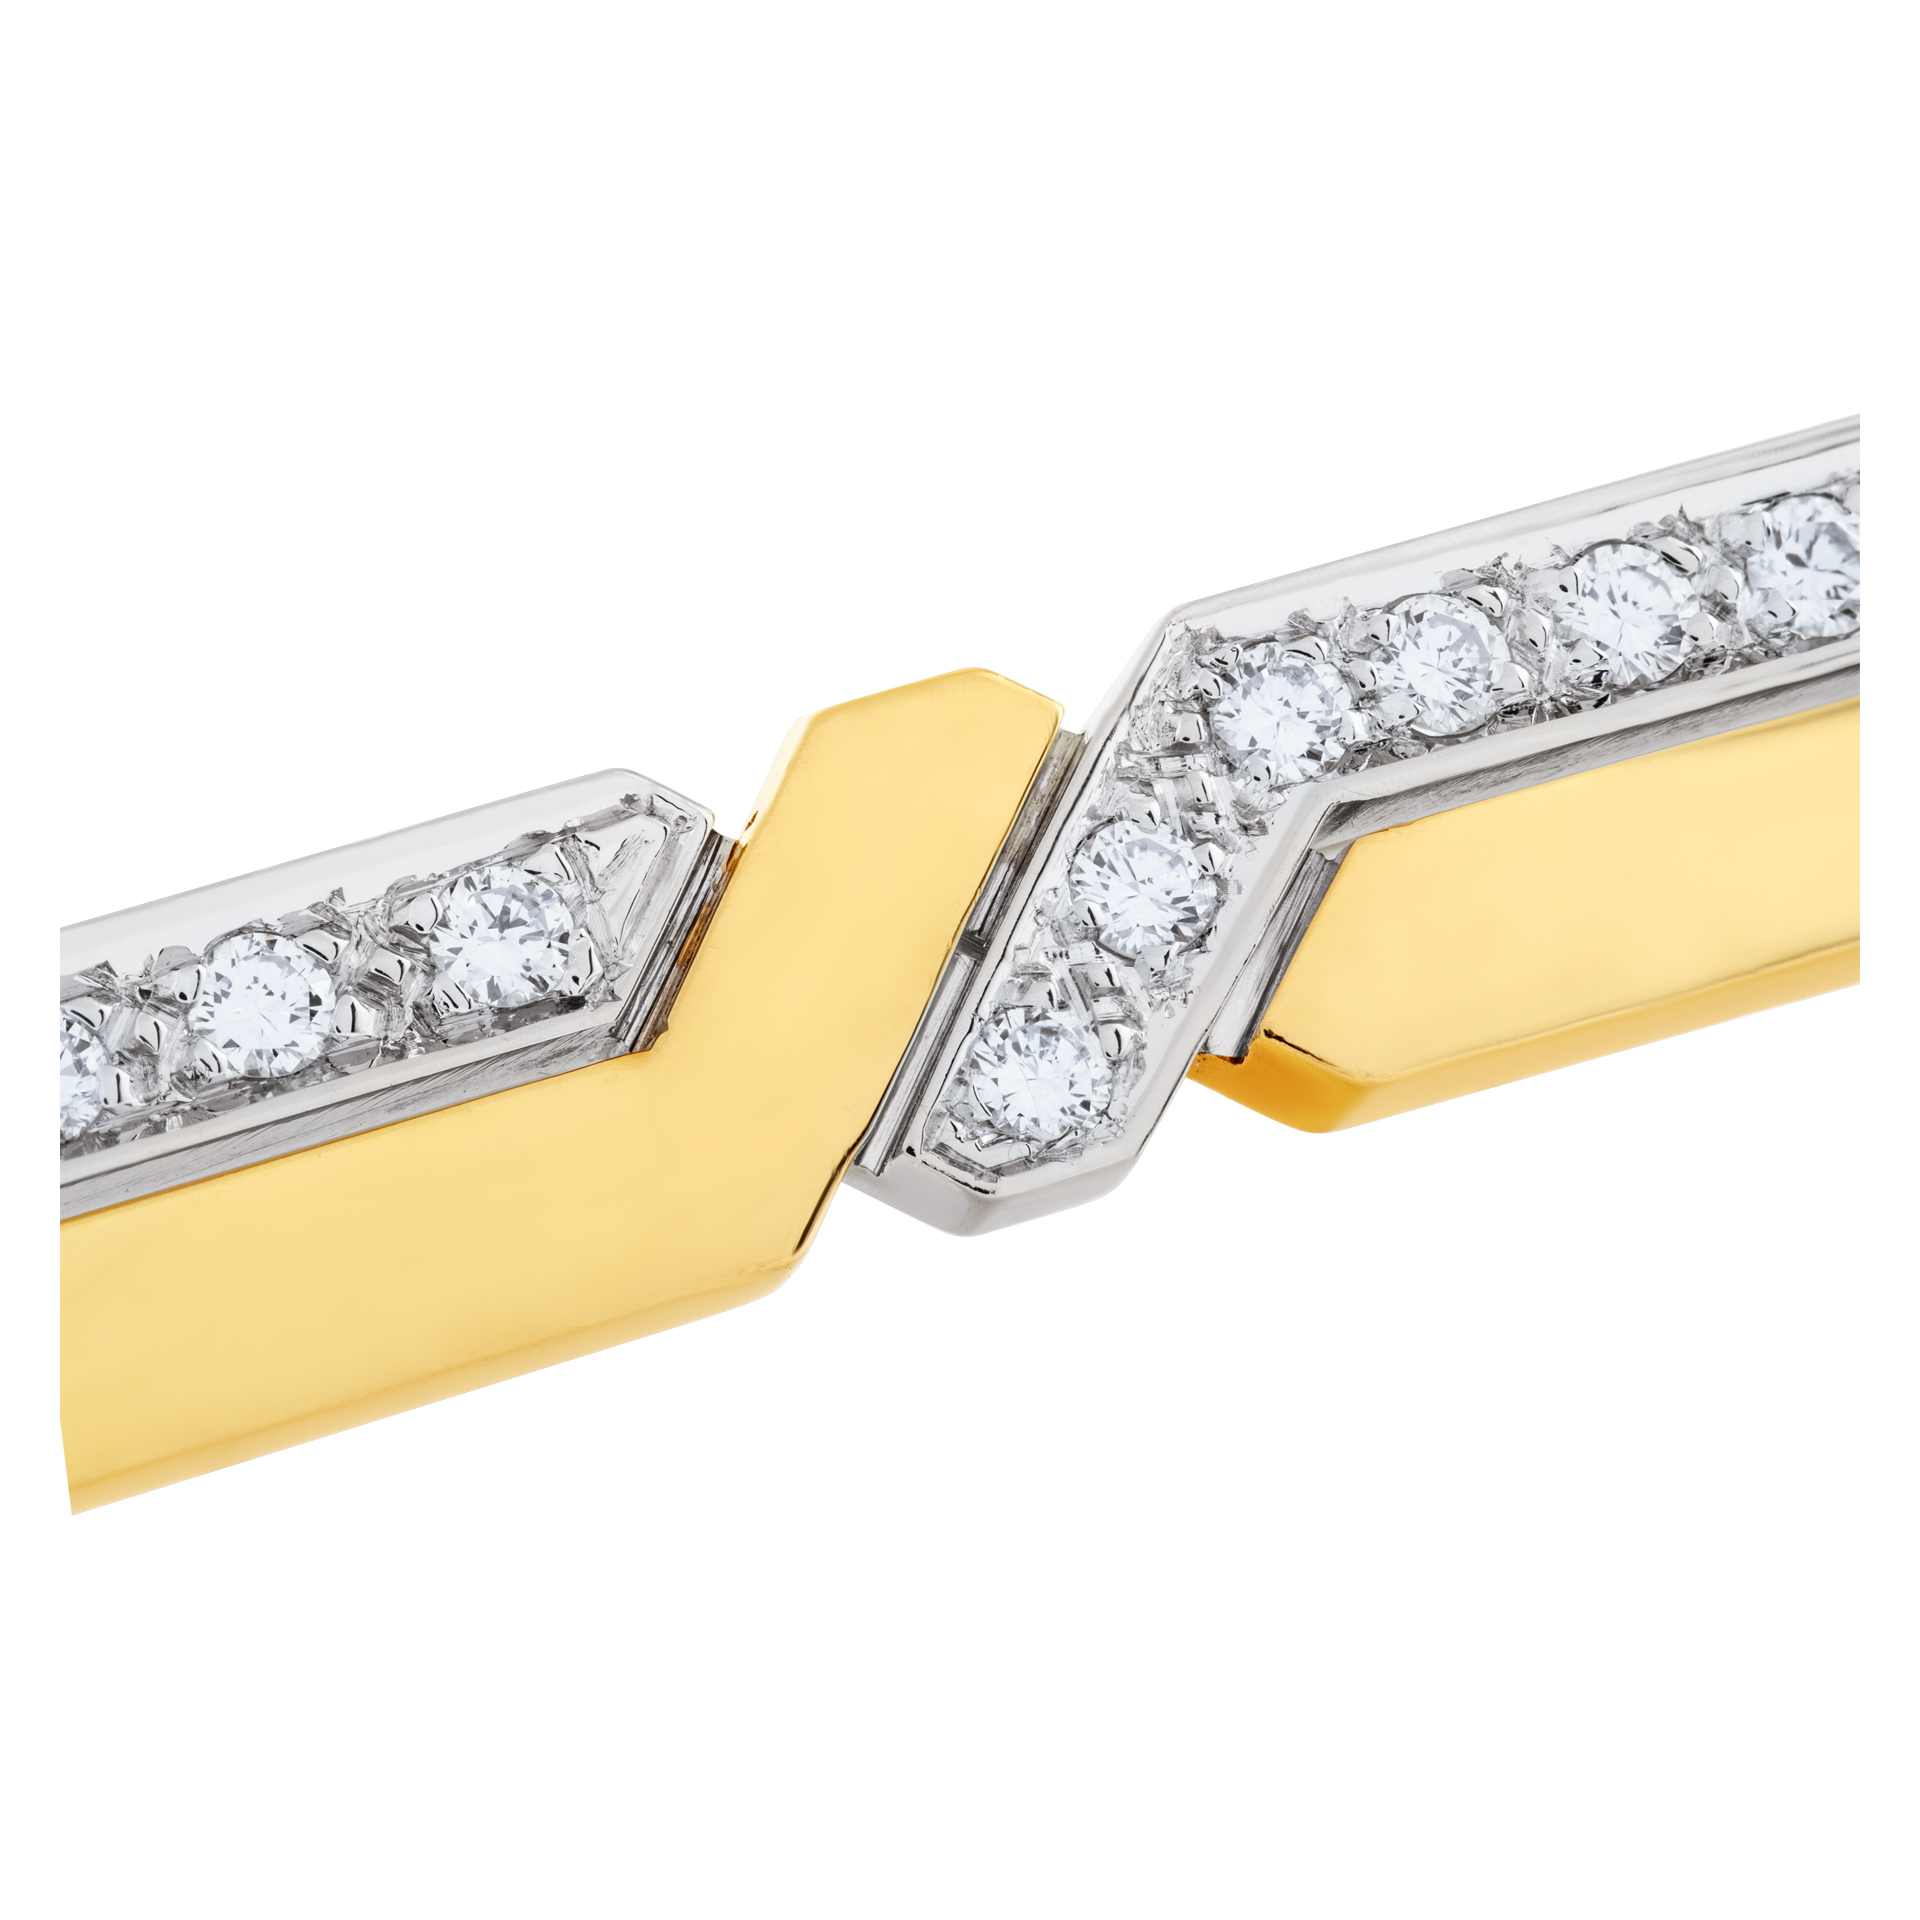 Pomellato Lightning Bolt Pin In 18k White & Yellow Gold With App 0.75 Cts In Diamonds image 2